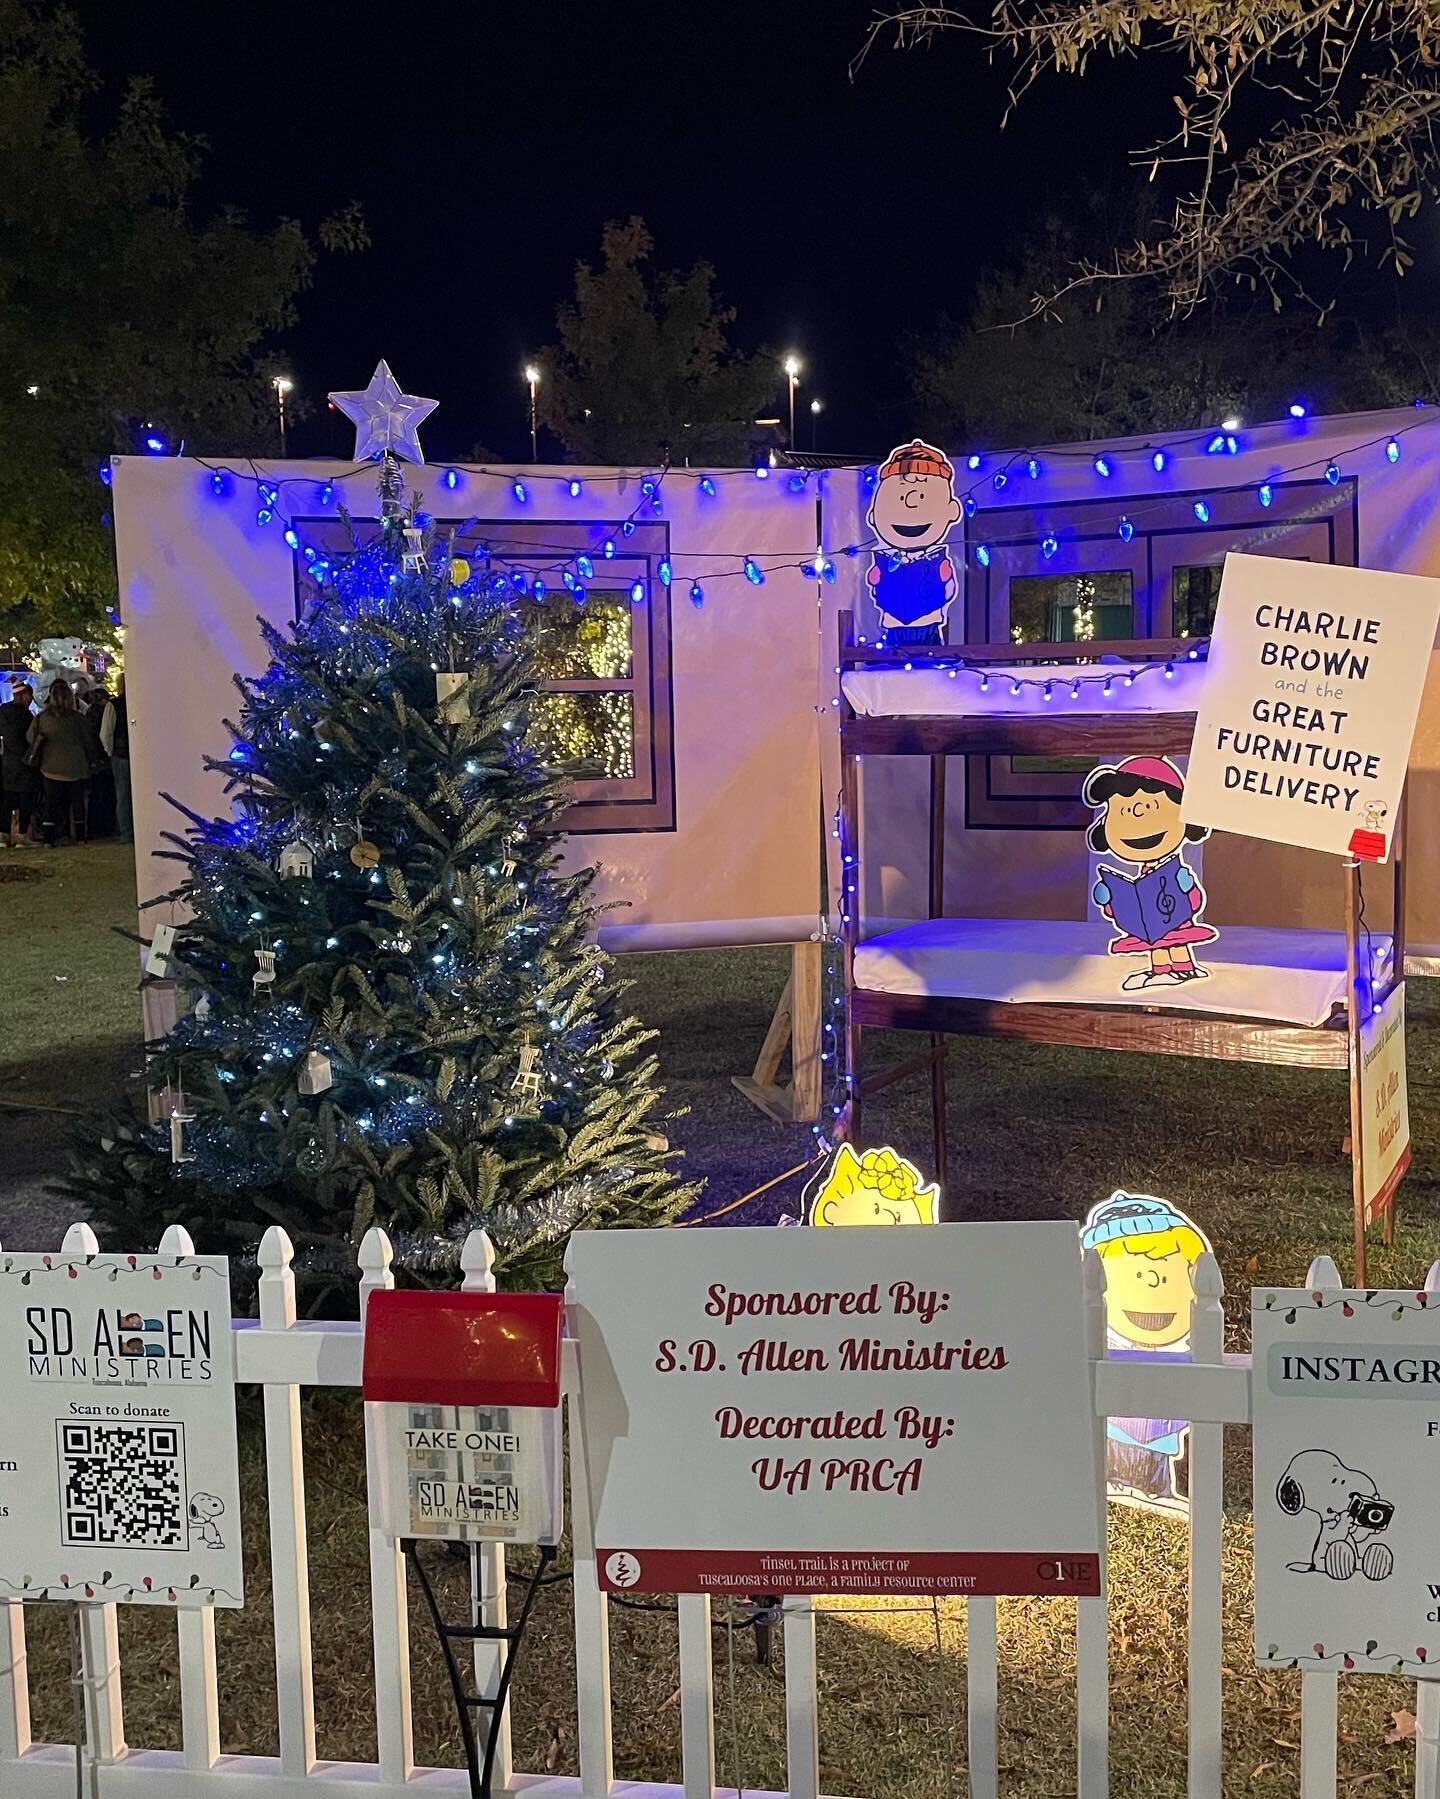 Charlie Brown and the Great Furniture Delivery 🎄 

Make sure and stop by our tree this Holiday season! Snap a photo with our tree and make a post or story and tag us to be entered into a drawing for $200!  Click the link in our bio to donate and hel